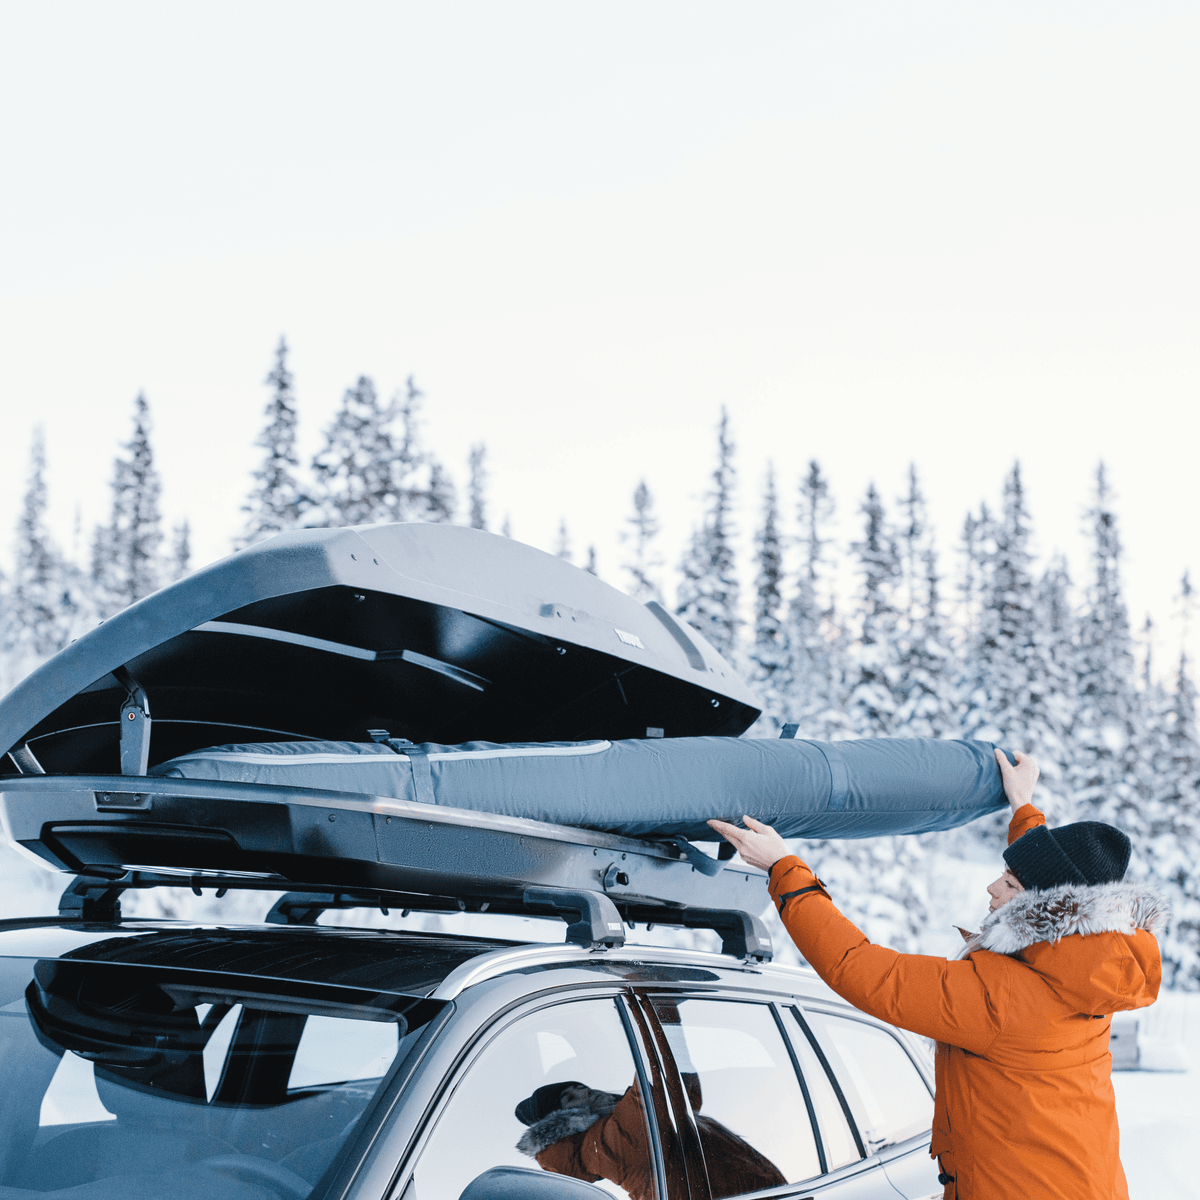 A person in the snow loads a Thule RoundTrip Snowboard Bag into the roof box of their car.